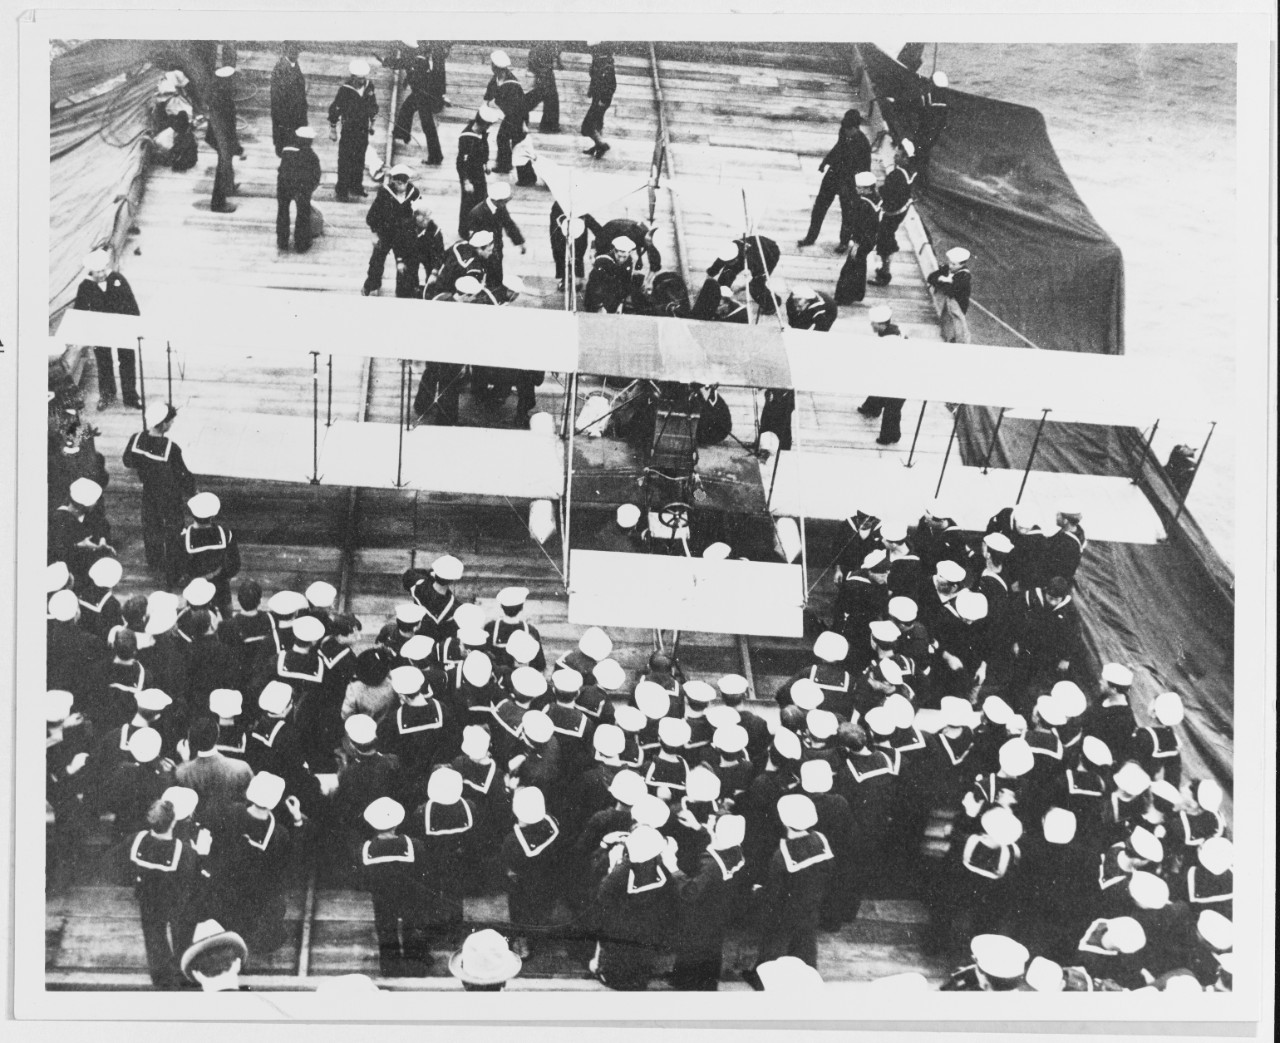 Photo #: NH 77503  First airplane landing on a warship, 18 January 1911